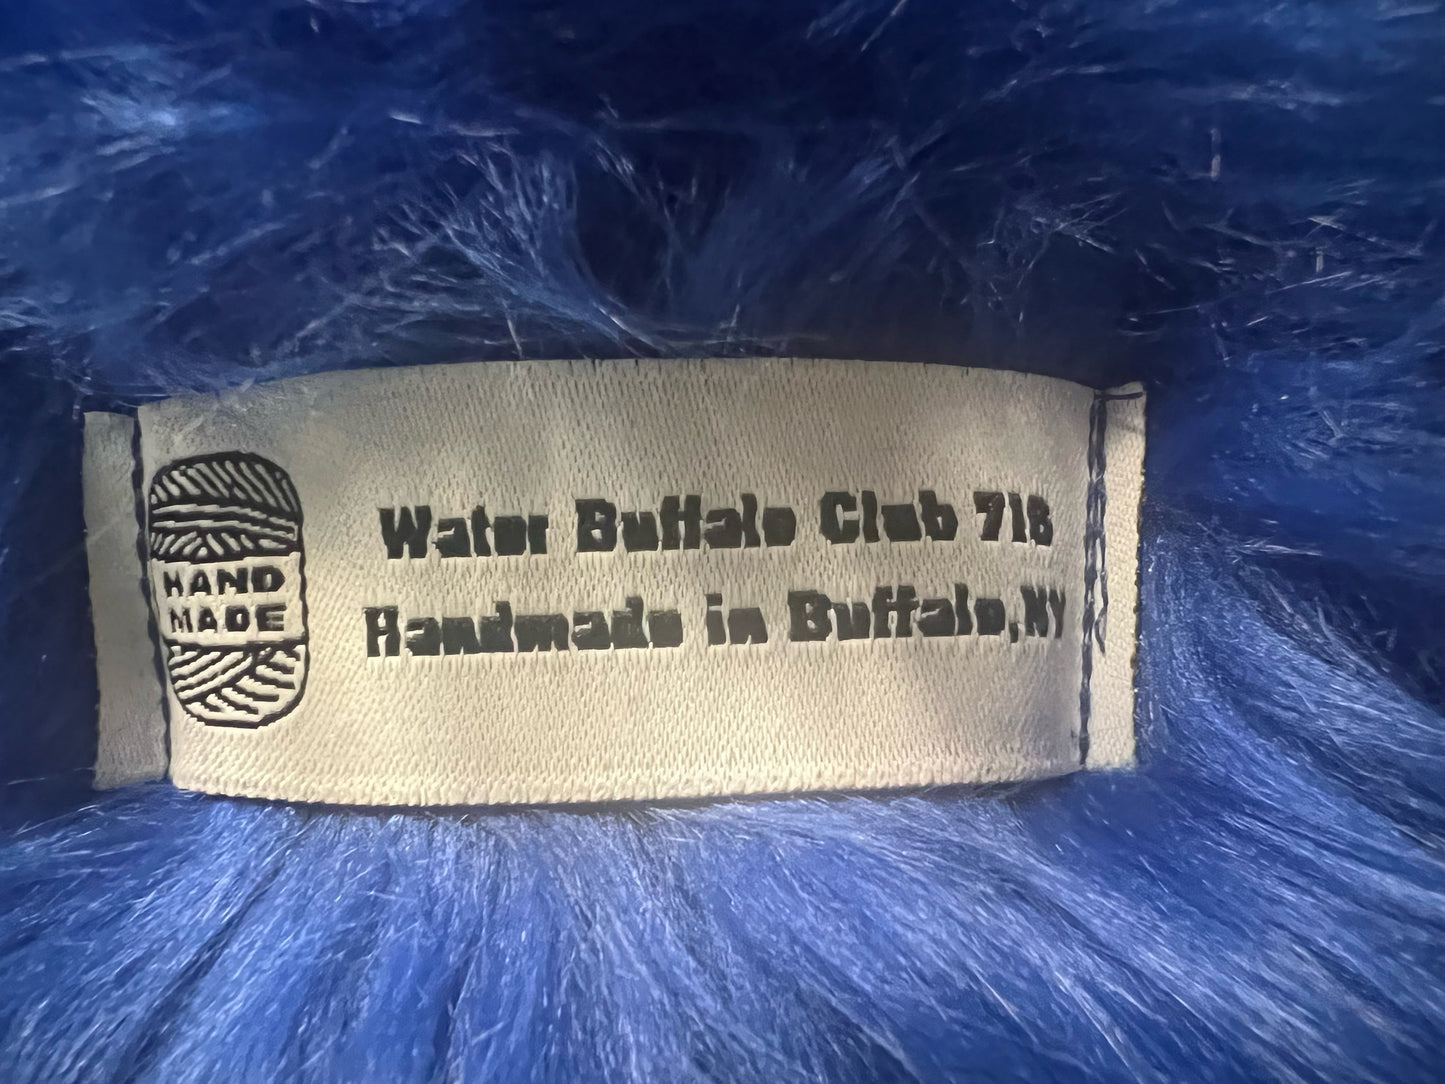 The Original and Official Water Buffalo Club DELUXE Handmade Hat